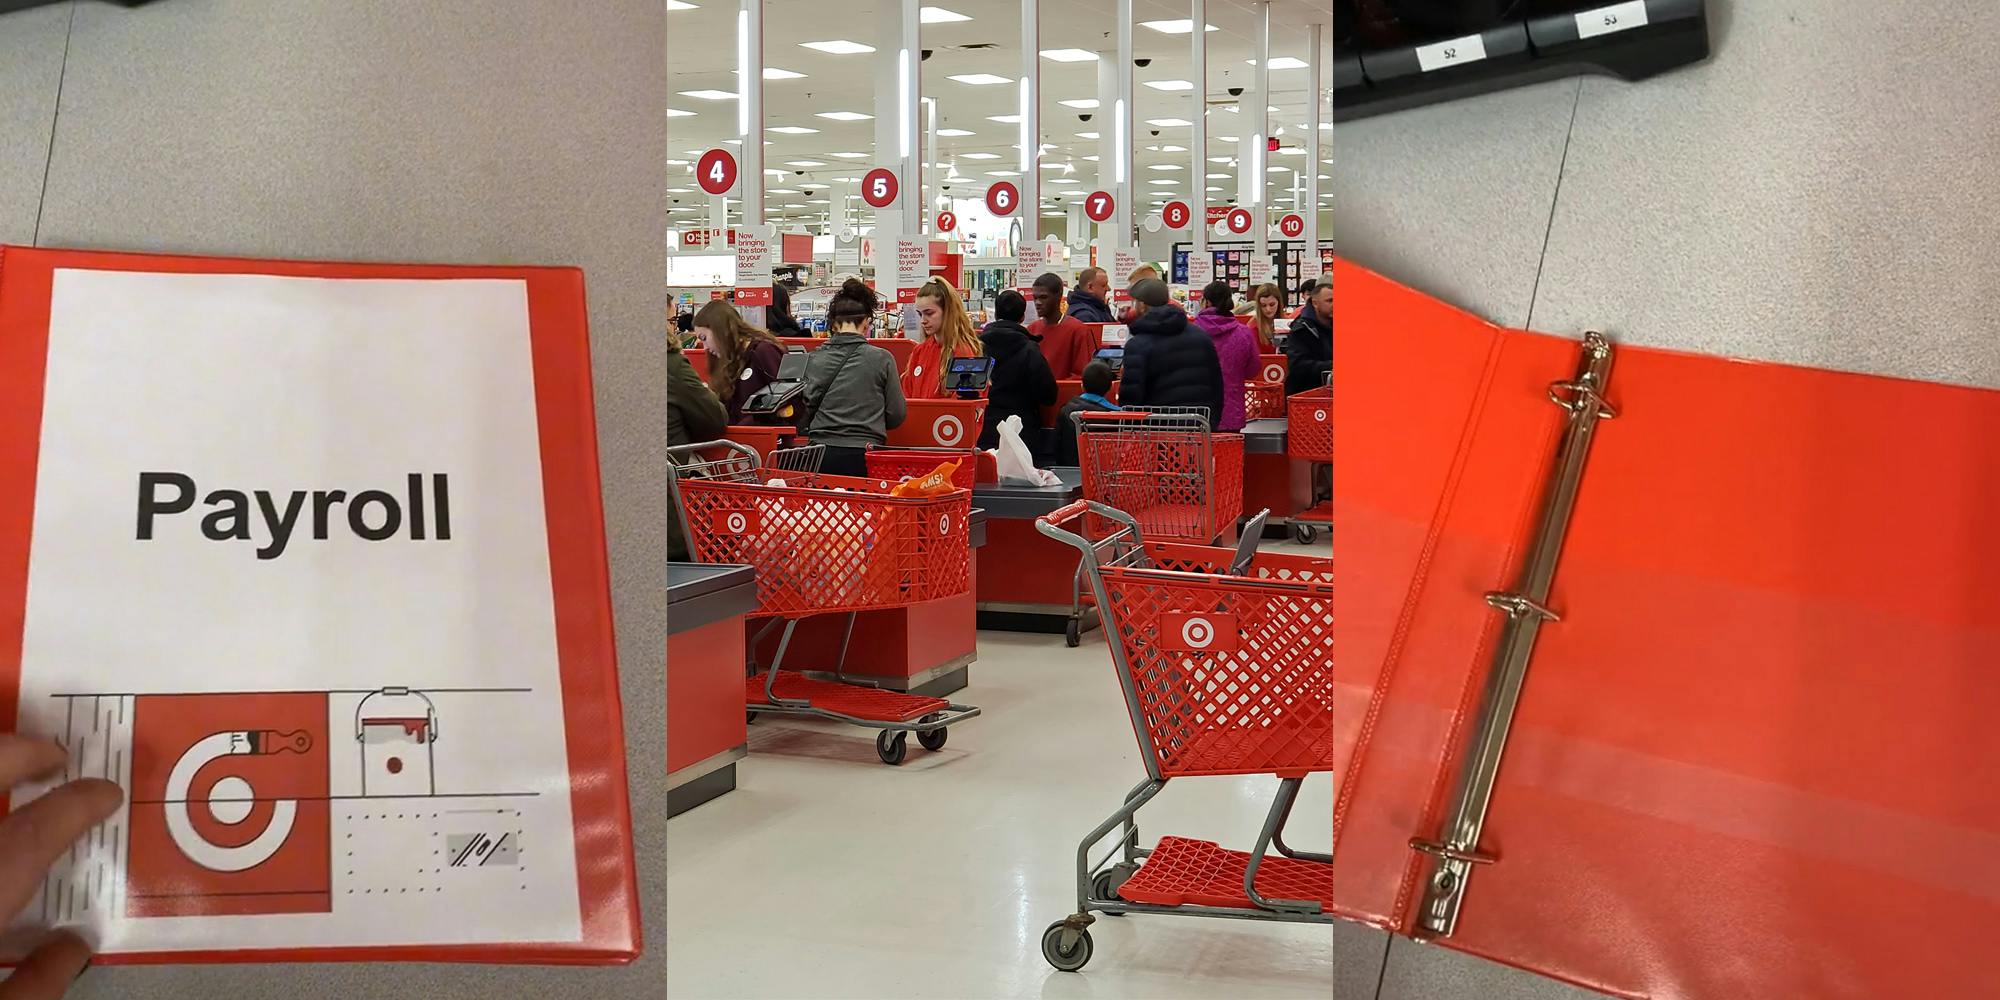 Target employee hand on closed "Payroll" binder on table (l) Target checkout with carts workers and people (c) Target payroll binder open to reveal nothing inside on table (r)